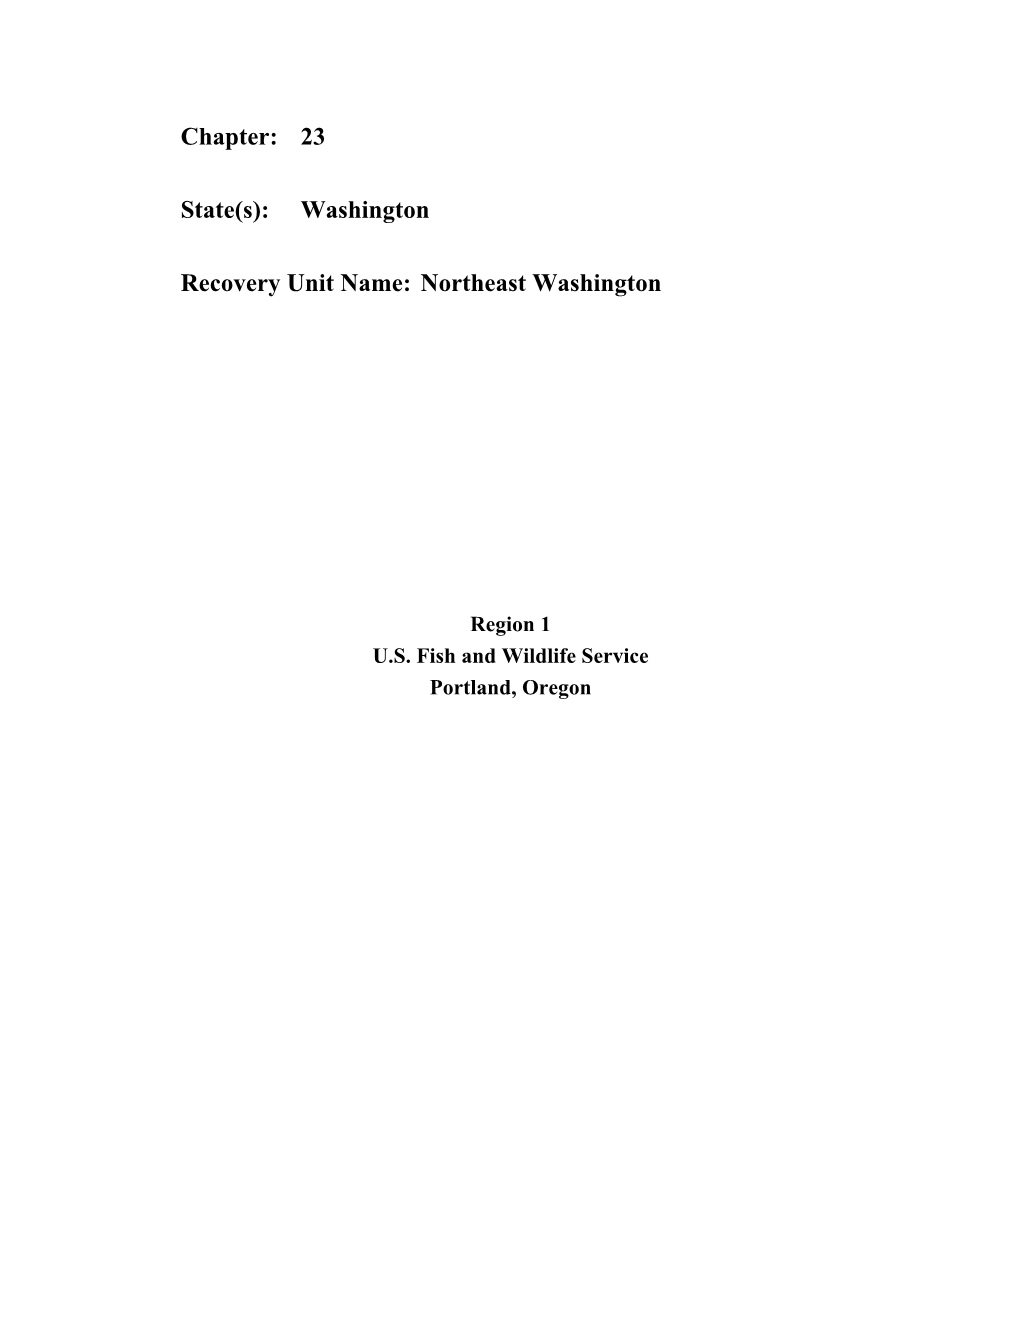 Chapter: 23 State(S): Washington Recovery Unit Name